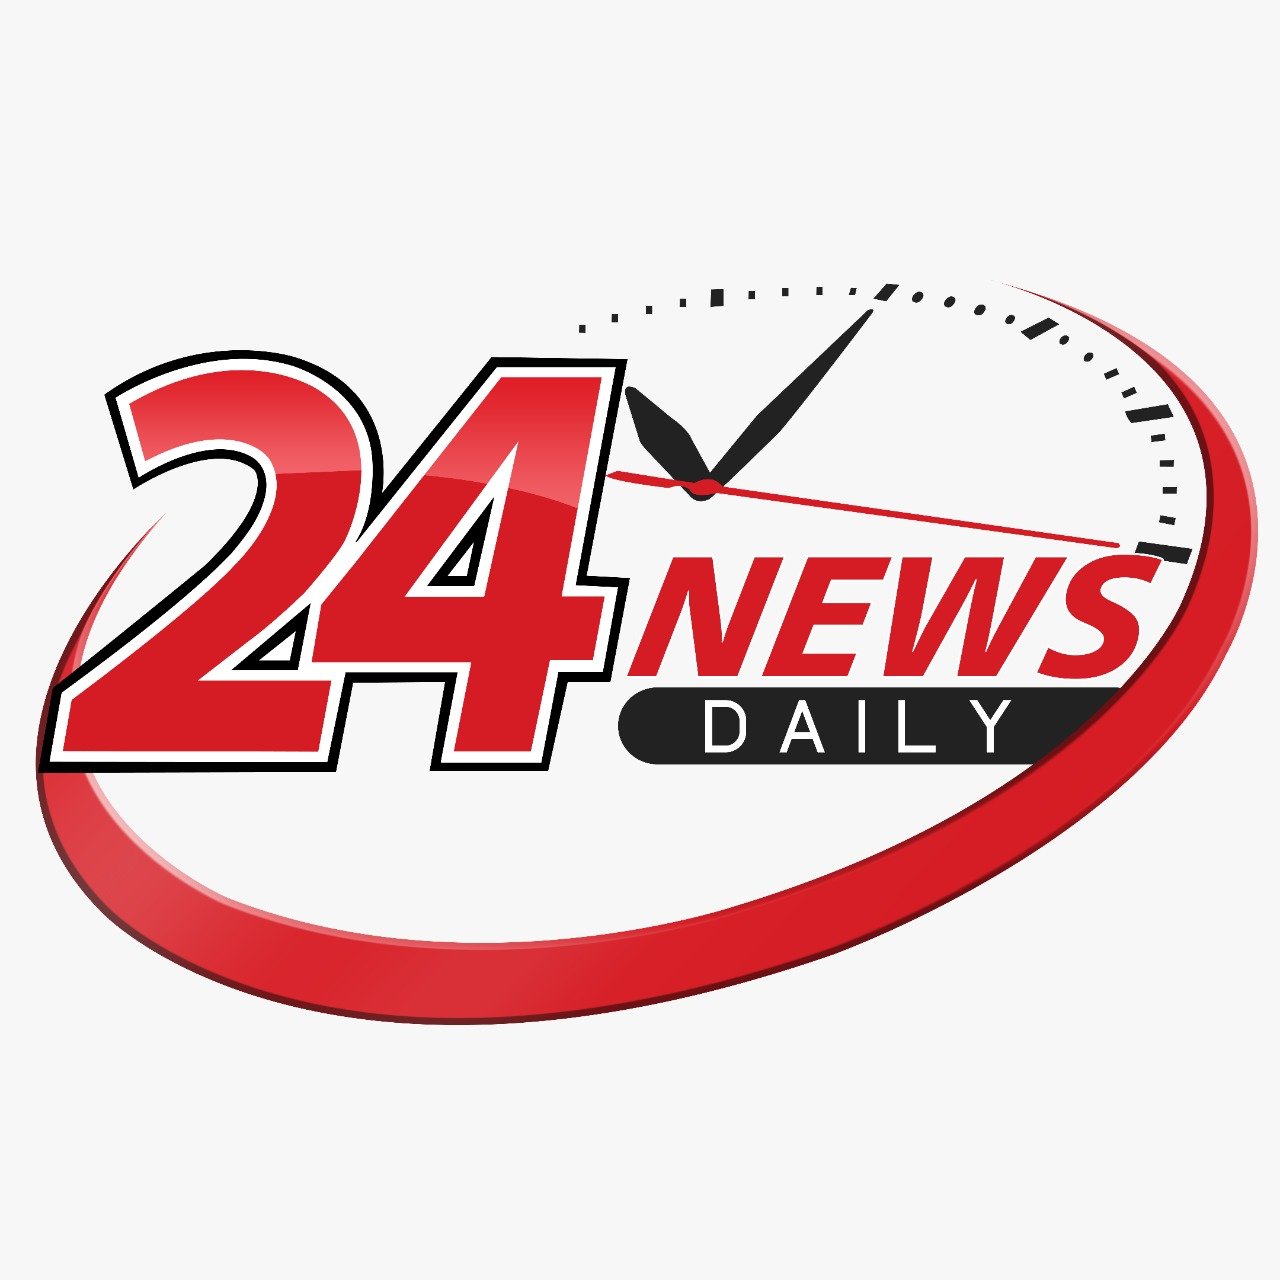 24news daily